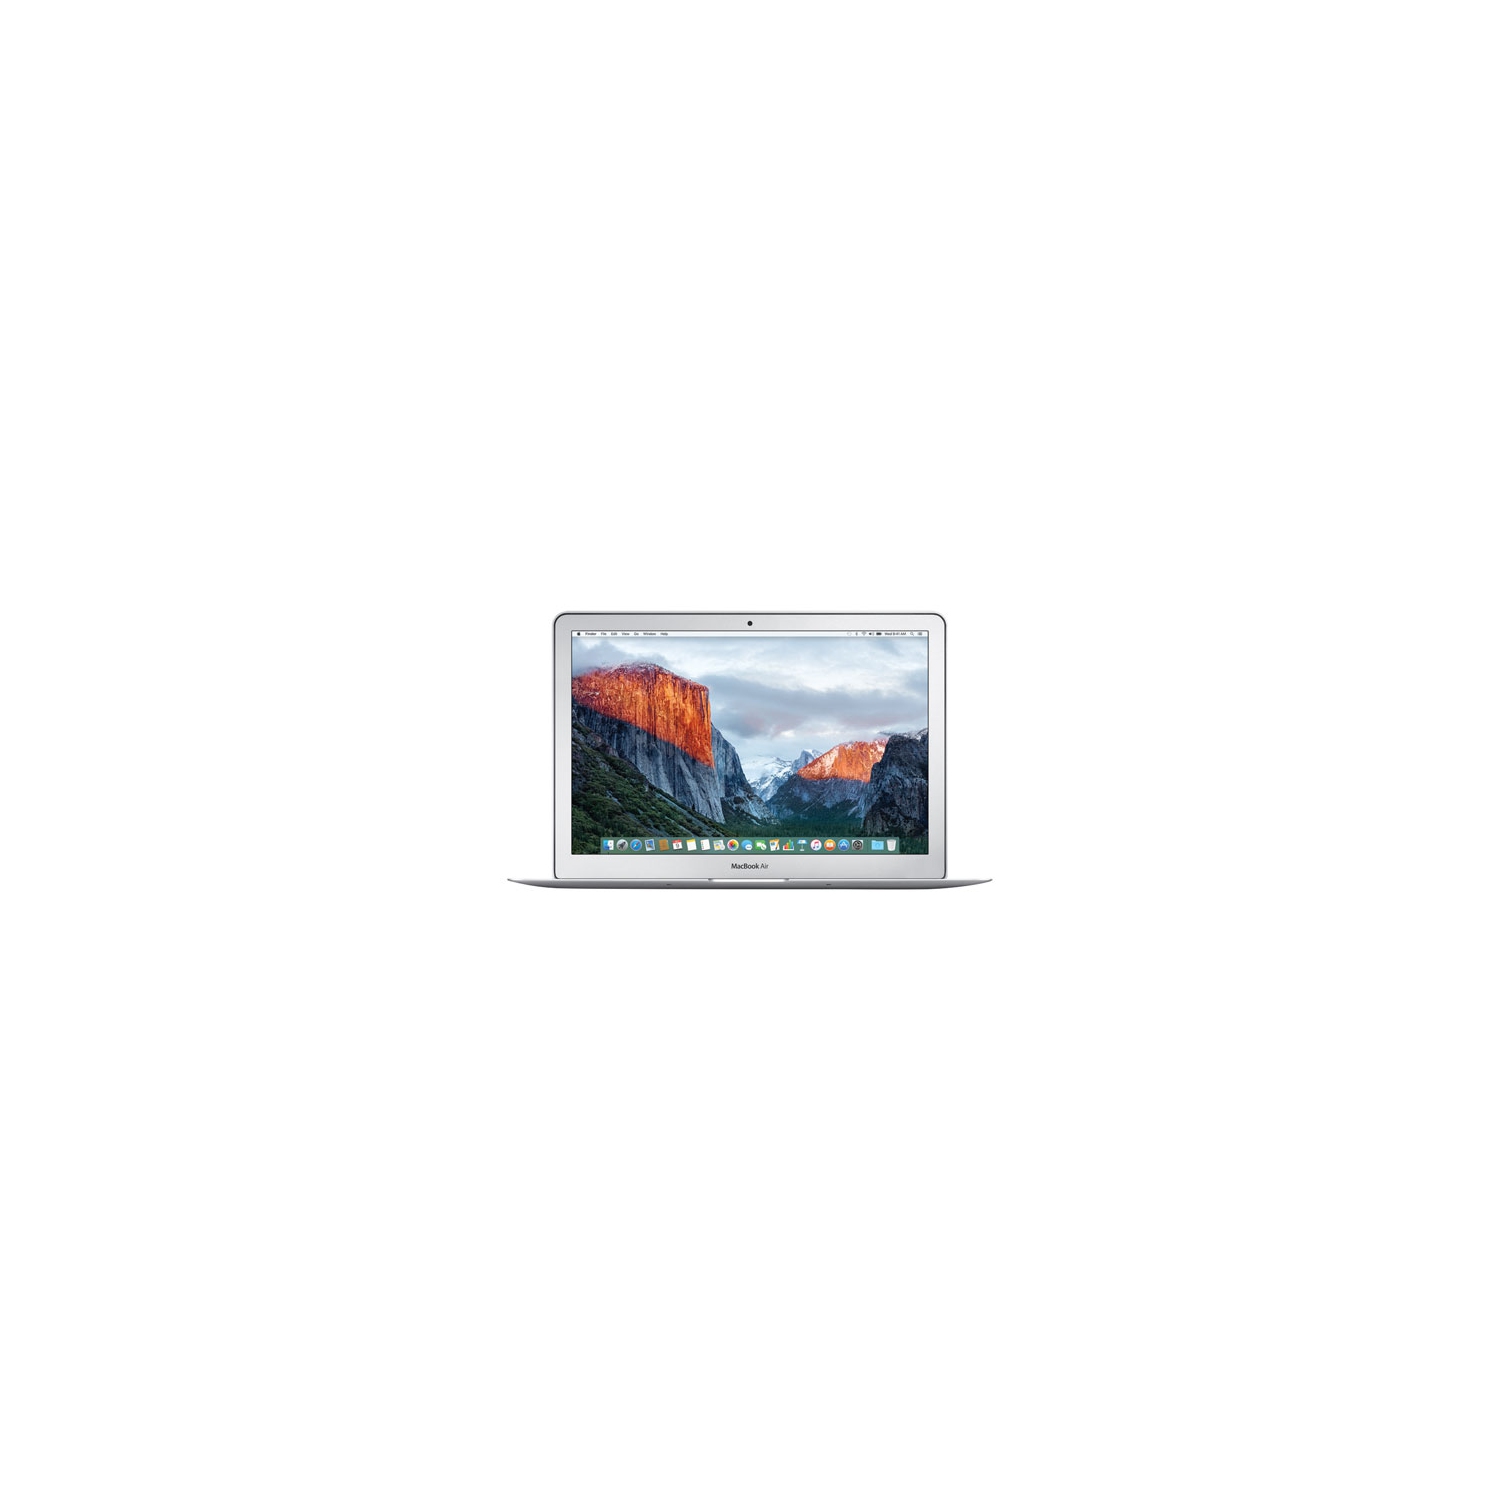 Refurbished (Good) - Apple MacBook Air 13.3" (2016) Dual-Core Intel Core i5 1.6GHz Laptop - French